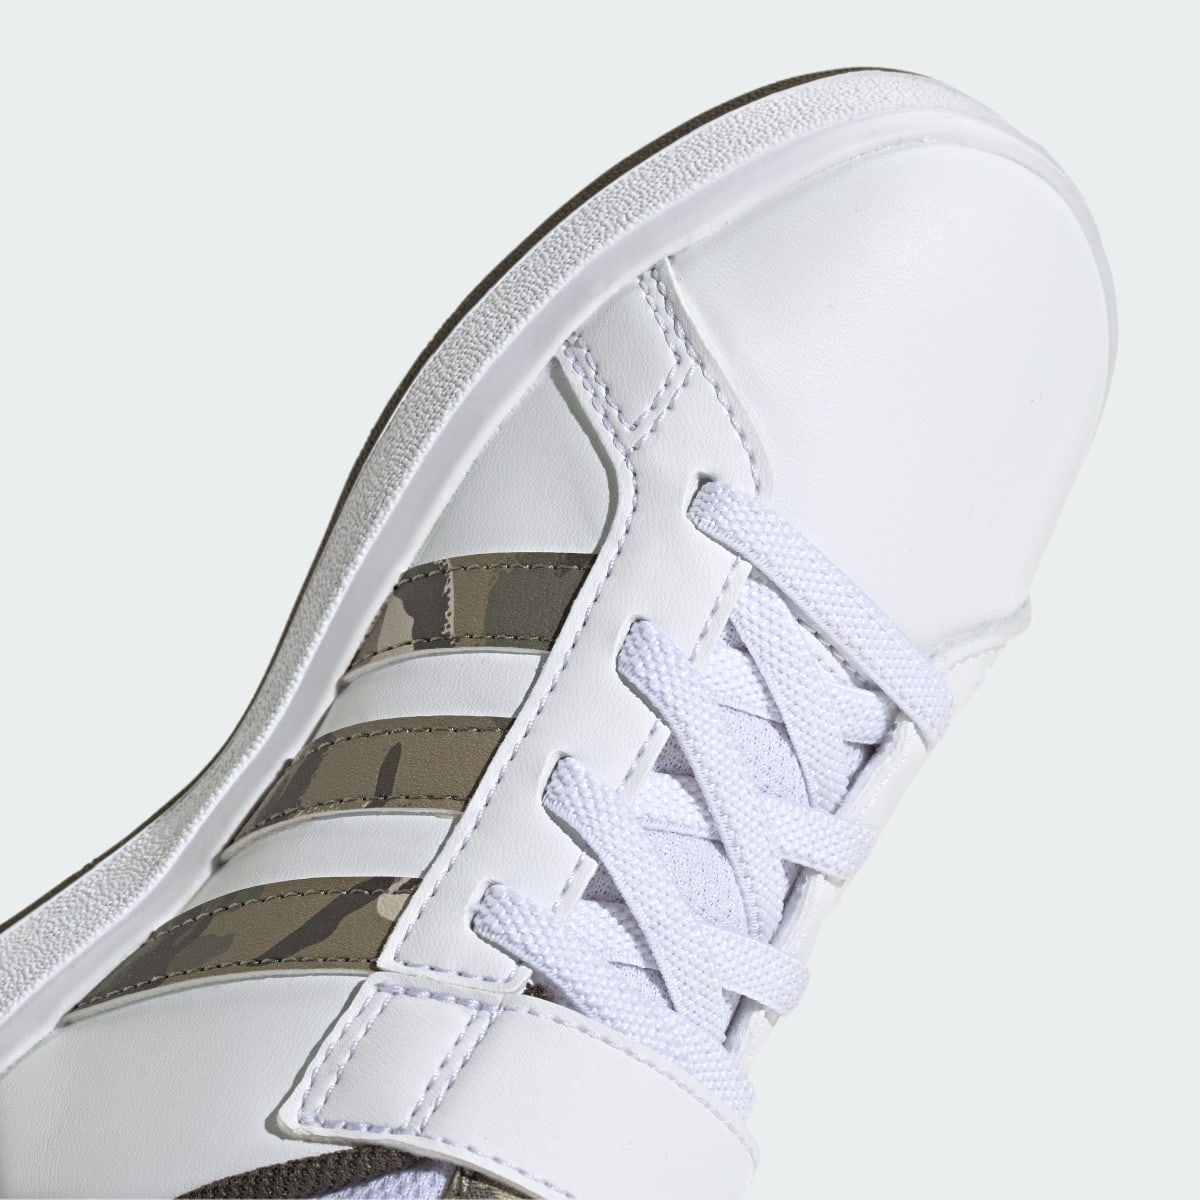 Adidas Grand Court 2.0 Shoes Kids. 10